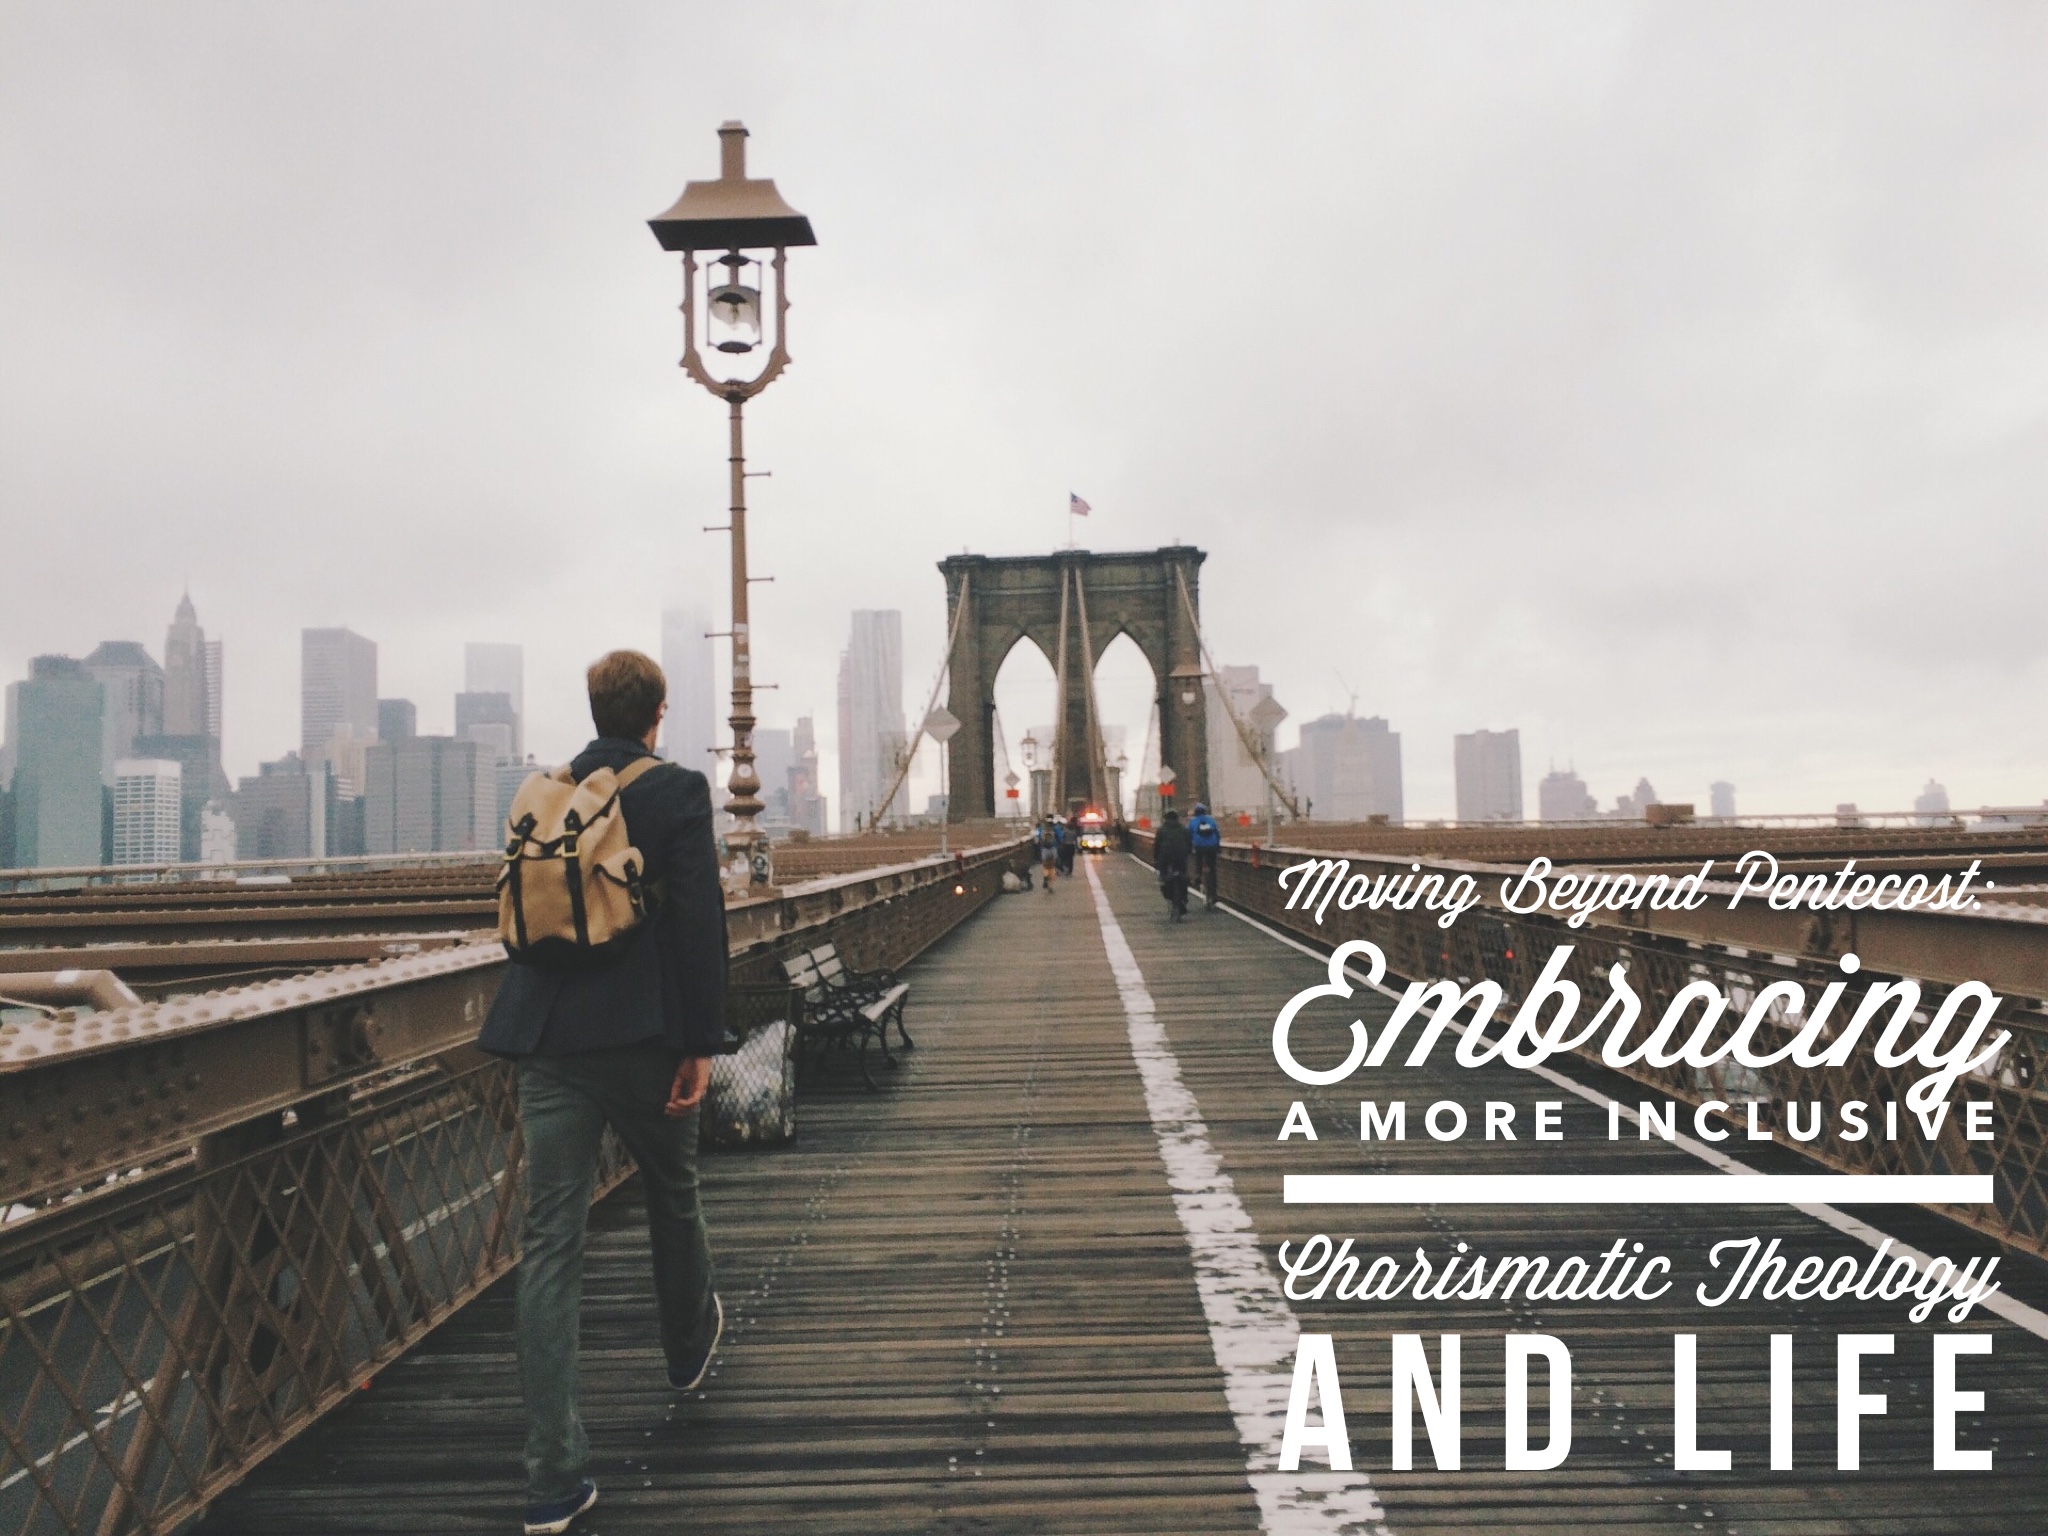 Moving Beyond Pentecost Embracing A More Inclusive Charismatic